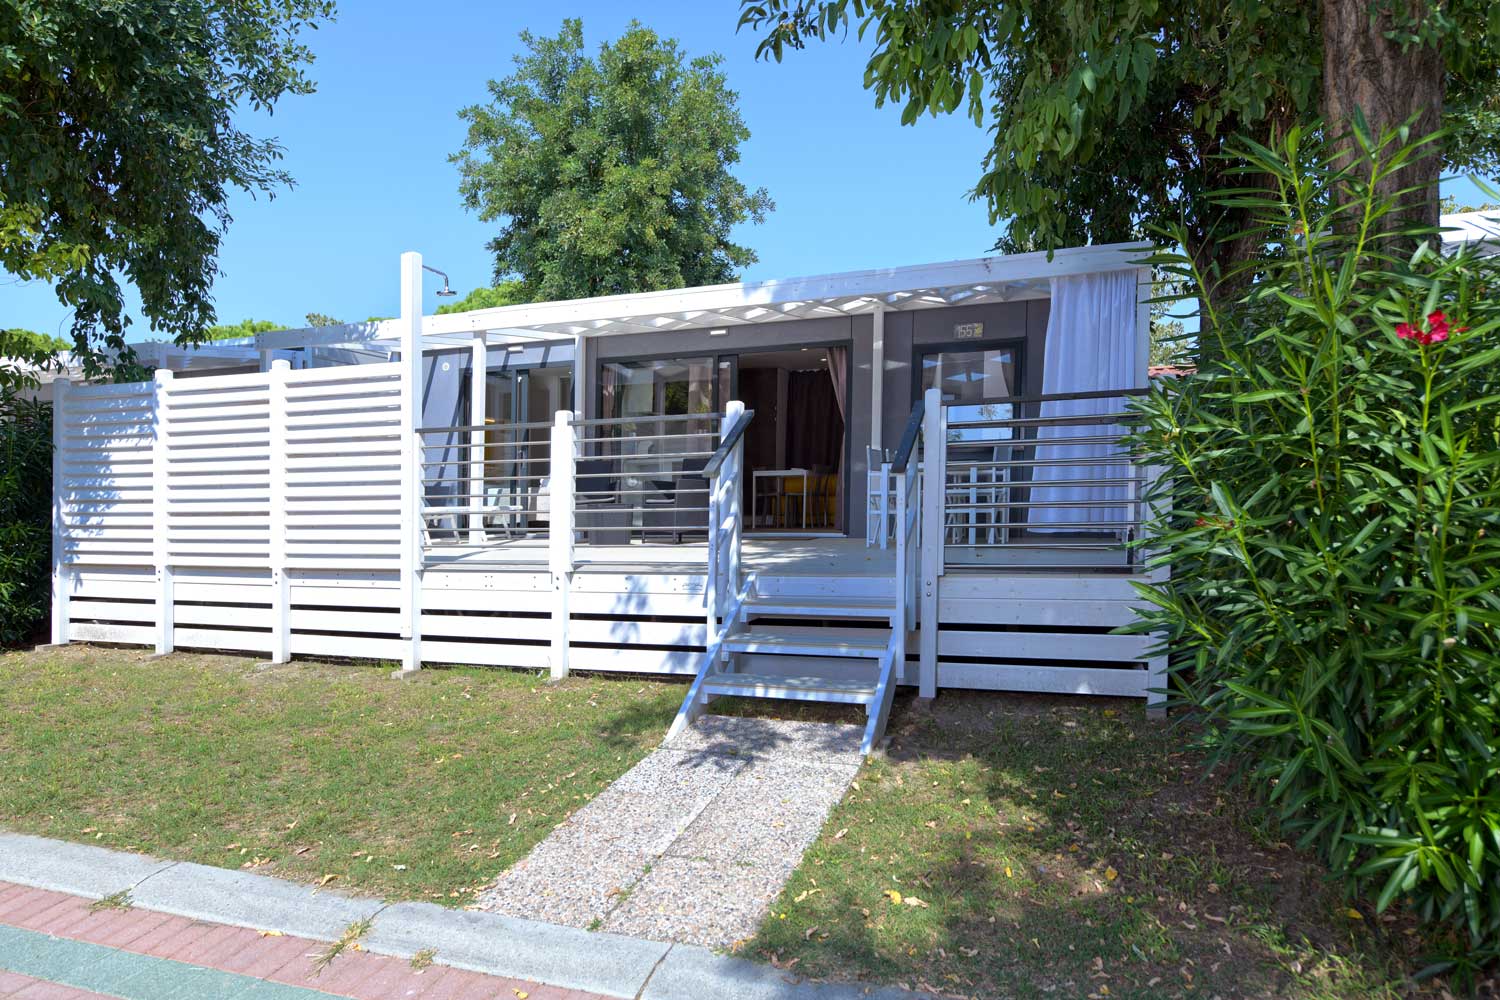 Location - Mobilhome 'Giglio' - 35M² - 2 Chambres À Coucher - Tahiti Camping & Thermae Bungalow Park